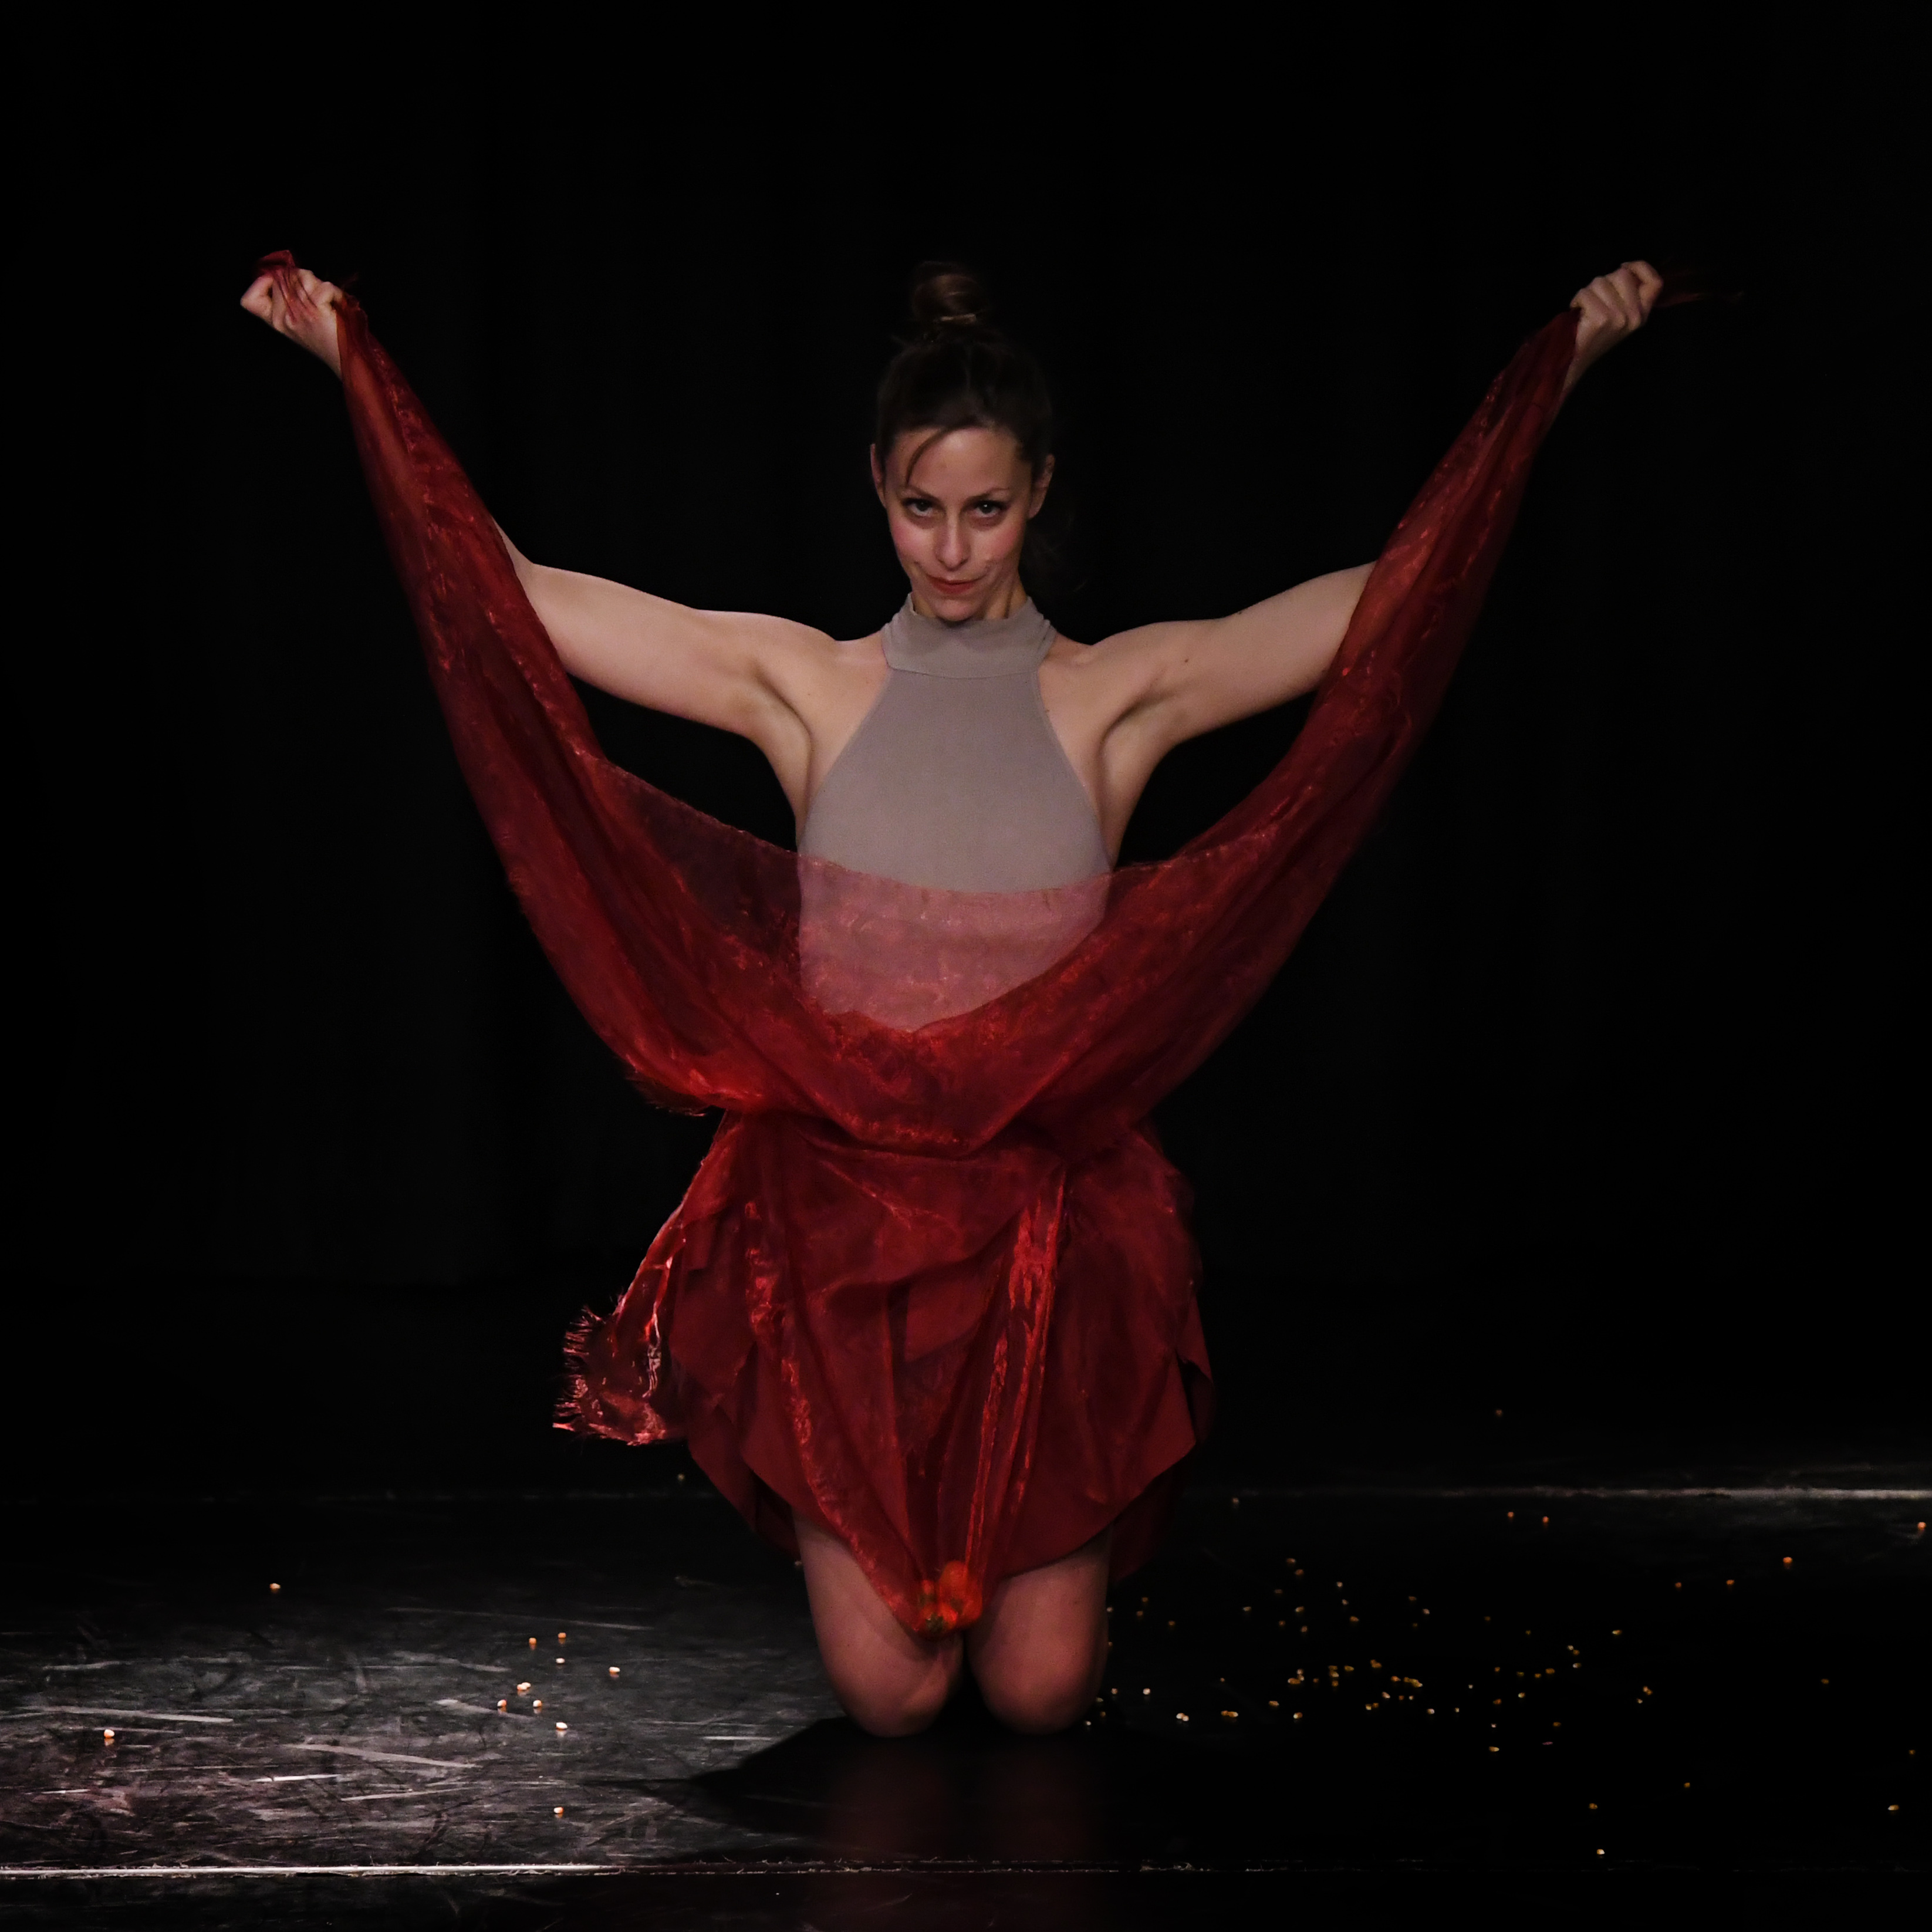 A dancer posts with a red cloak.